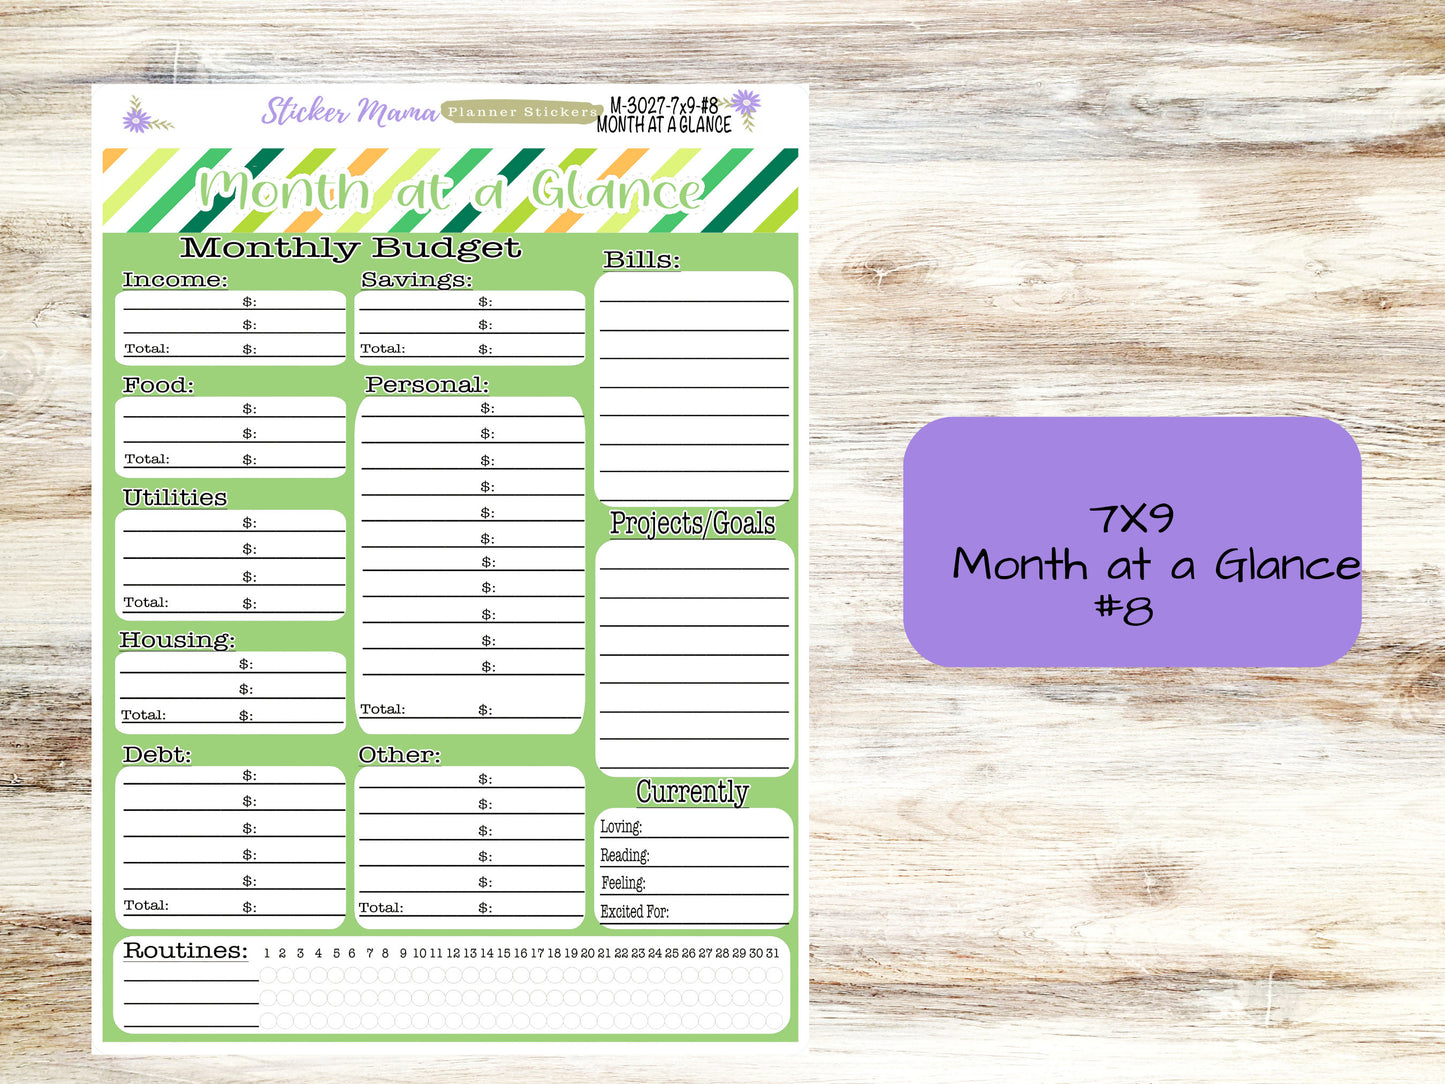 BUDGET - MONTH @ a GLANCE- 3027 || A5 & 7x9 || Budget Sticker Kit || Notes Page Stickers || Planner Budget Kit